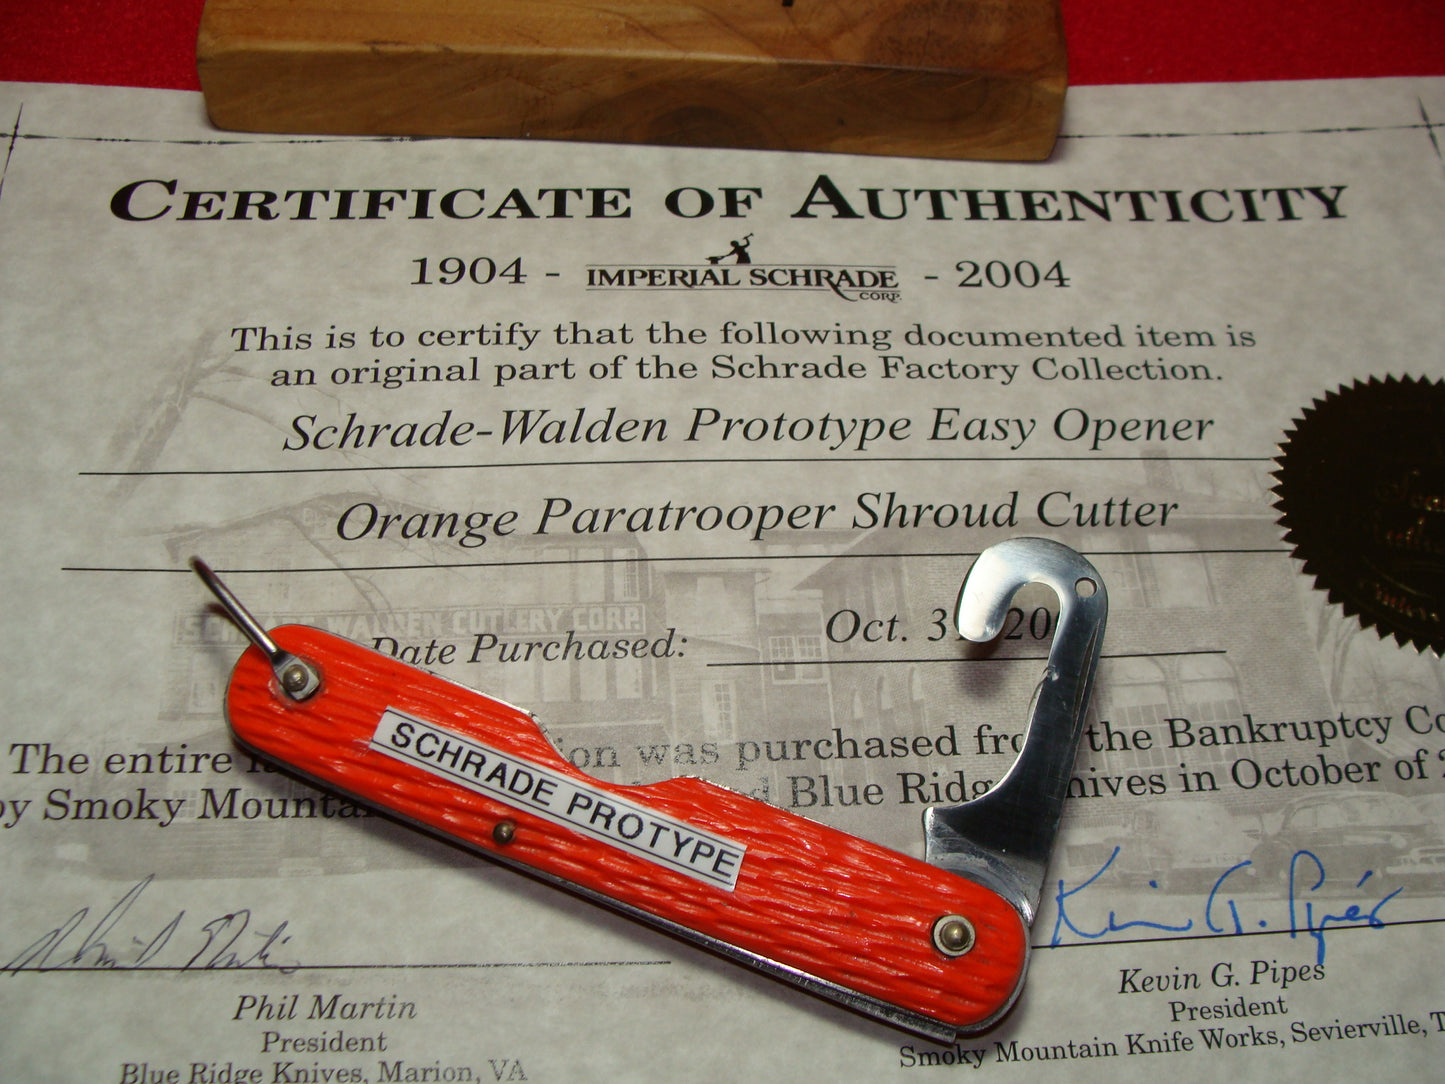 SCHRADE WALDEN NY 1946-76 PROTOTYPE EASY OPENER FOLDING PARATROOPER SHROUD CUTTER MILITARY NON AUTOMATIC KNIFE ORANGE DELRIN HANDLES PART OF THE SCHRADE FACTORY COLLECTION